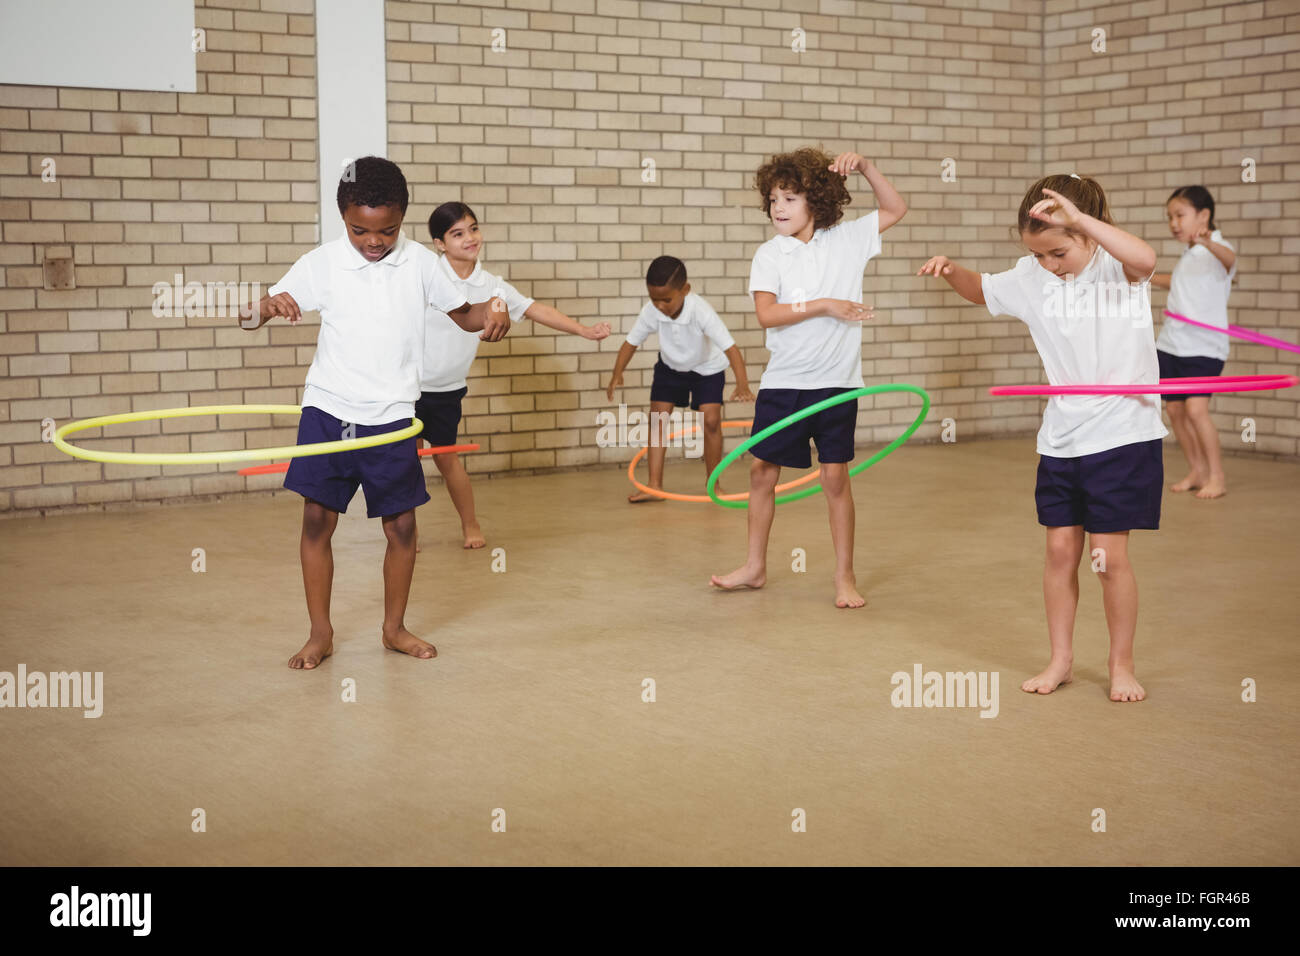 Students using some hula hoops Stock Photo